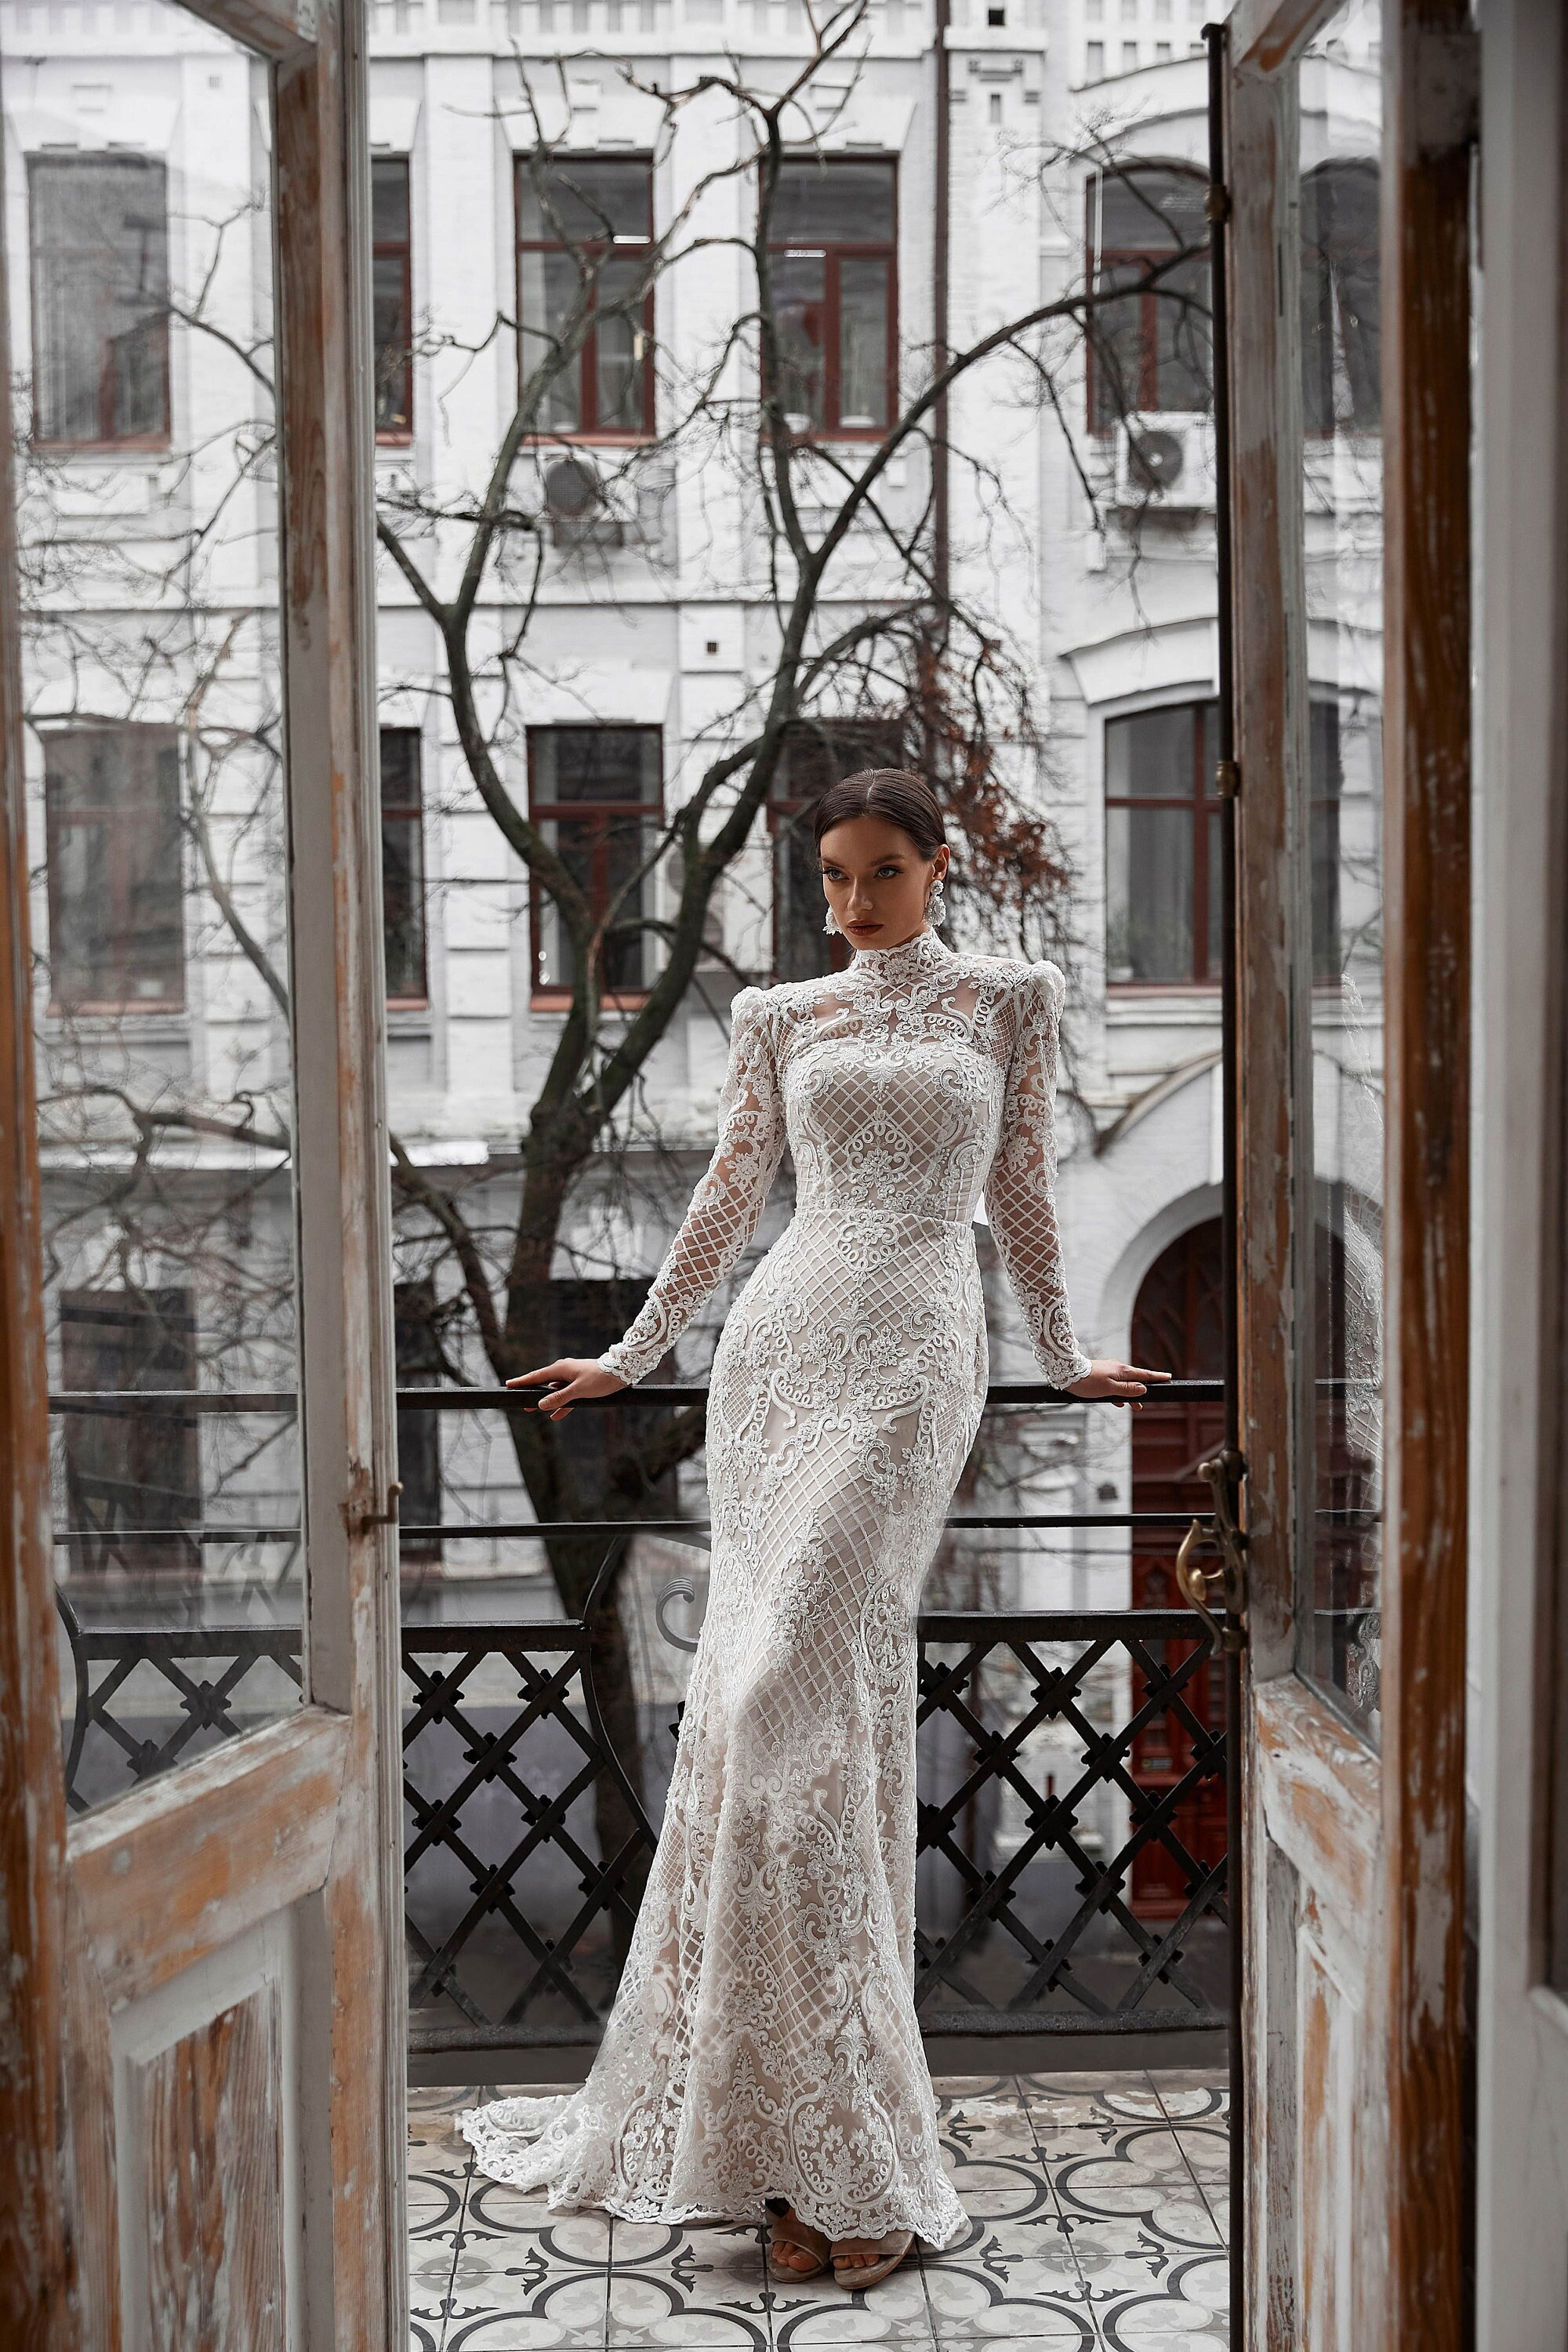 Modest Long Sleeve Lace A-Line Wedding Dress with High Neckline